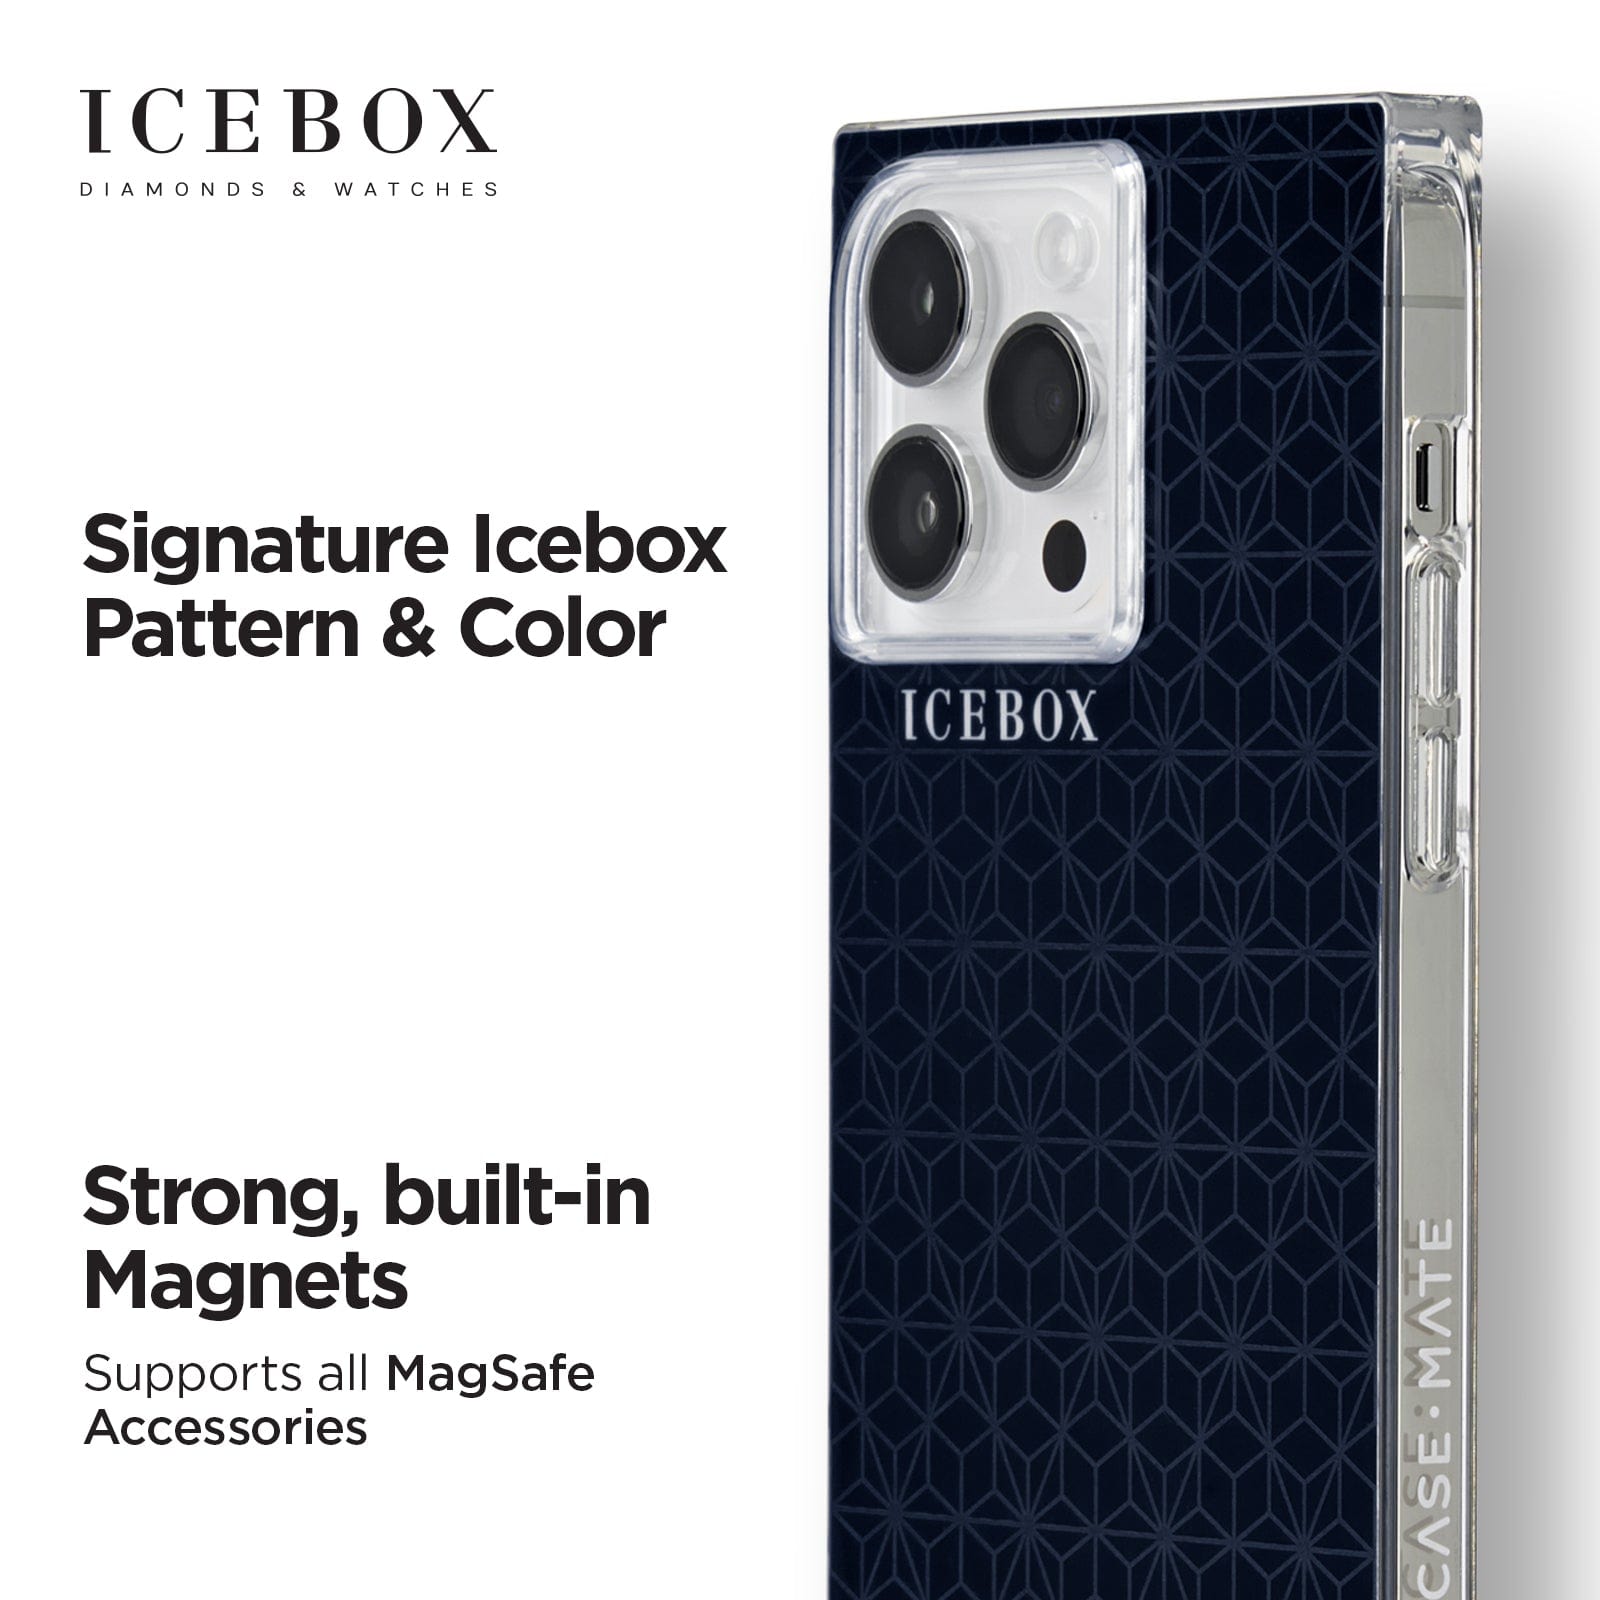 SIGNATURE ICEBOX PATTERN AND COLOR. STRONG BUILTIN MAGNETS SUPPORTS ALL MAGSAFE ACCESSORIES